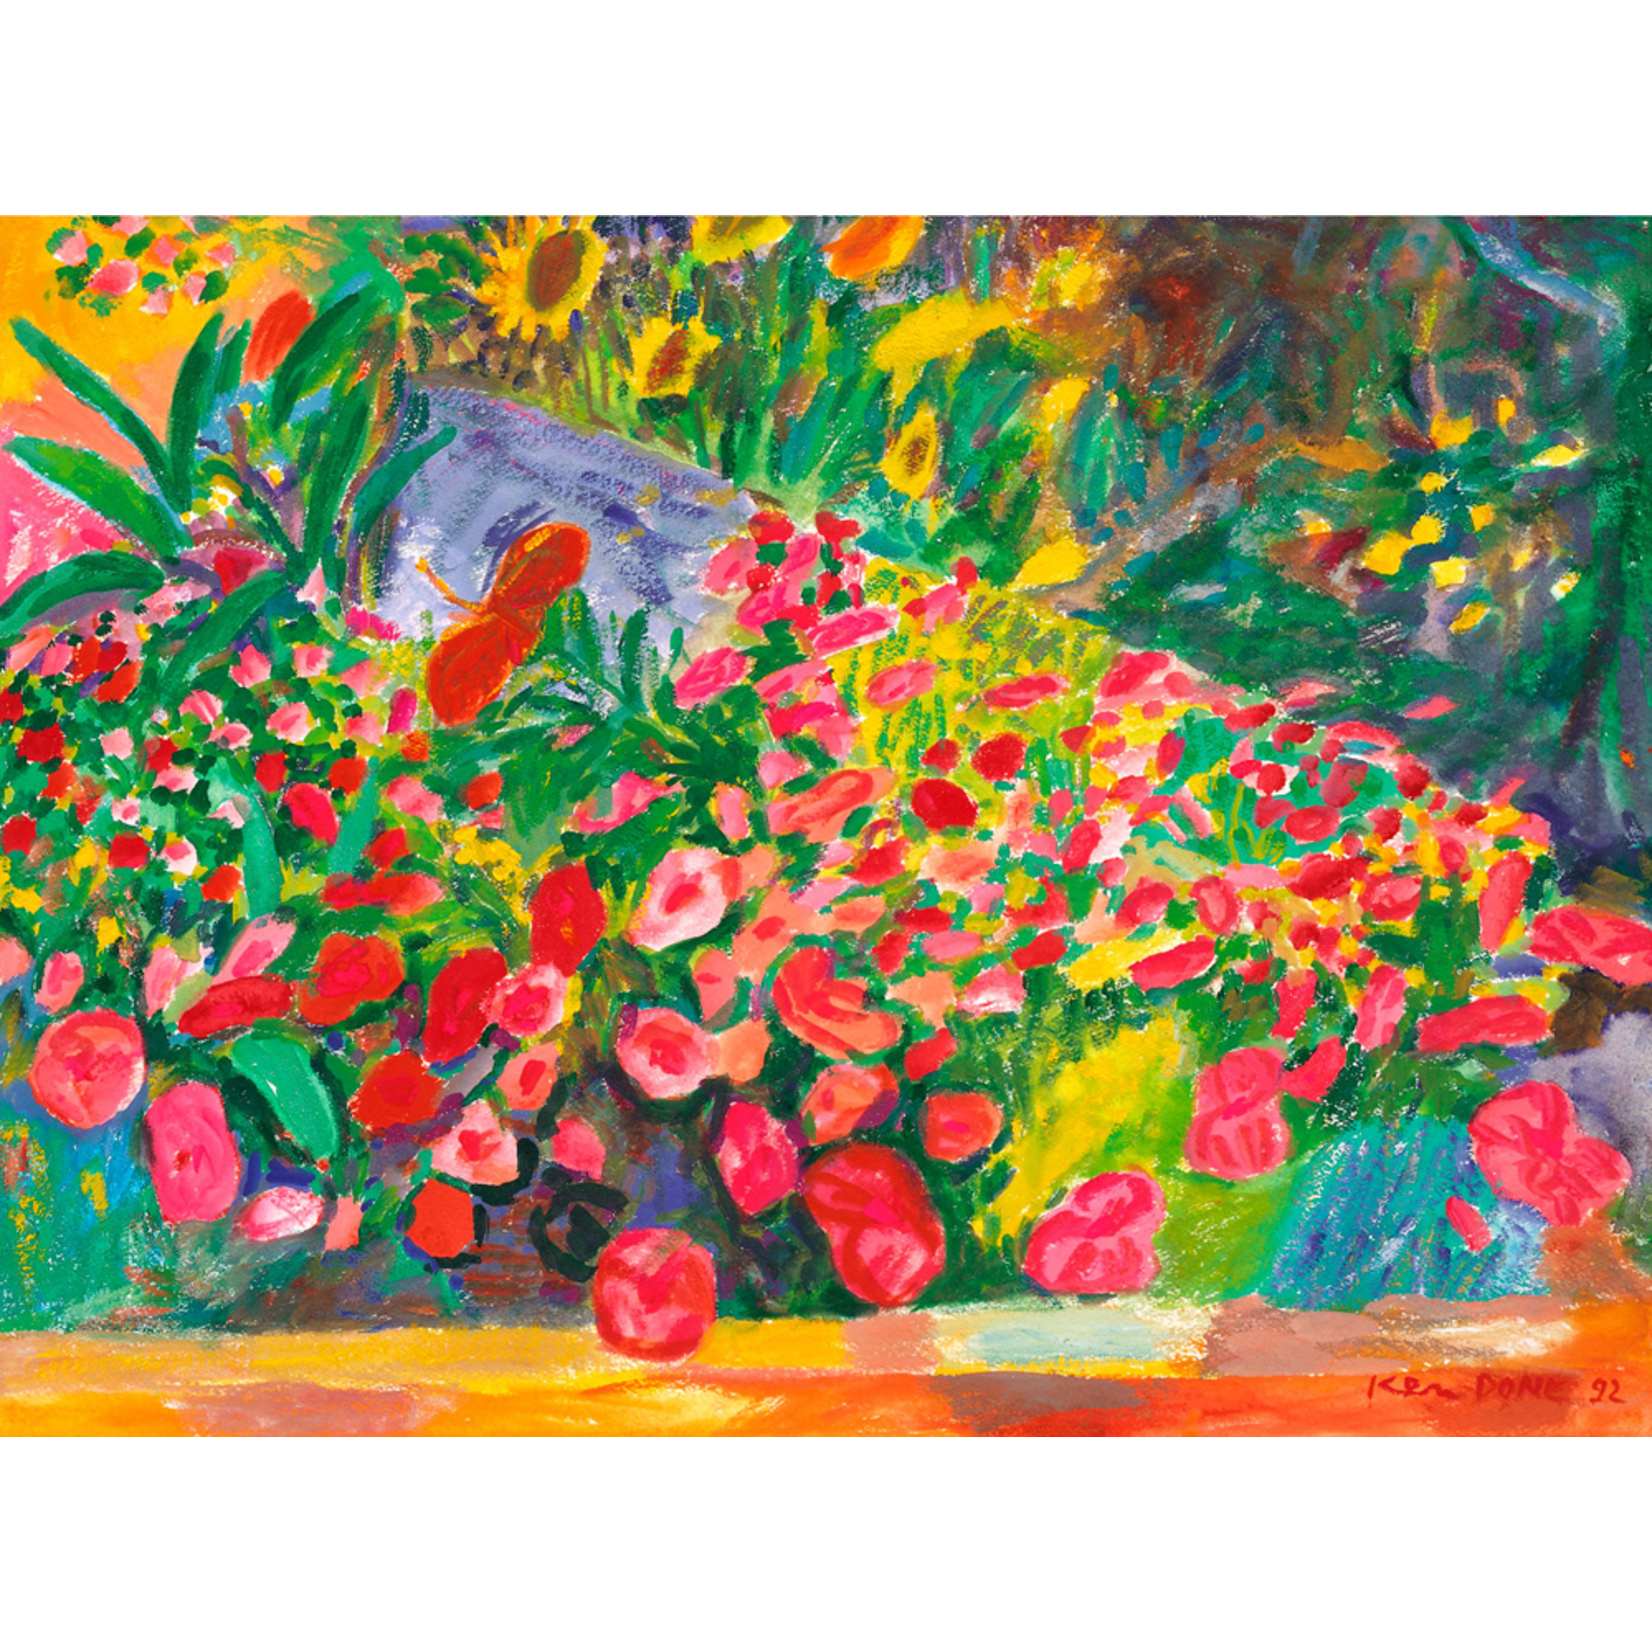 Limited Edition Prints Rocks and flowers, 1992